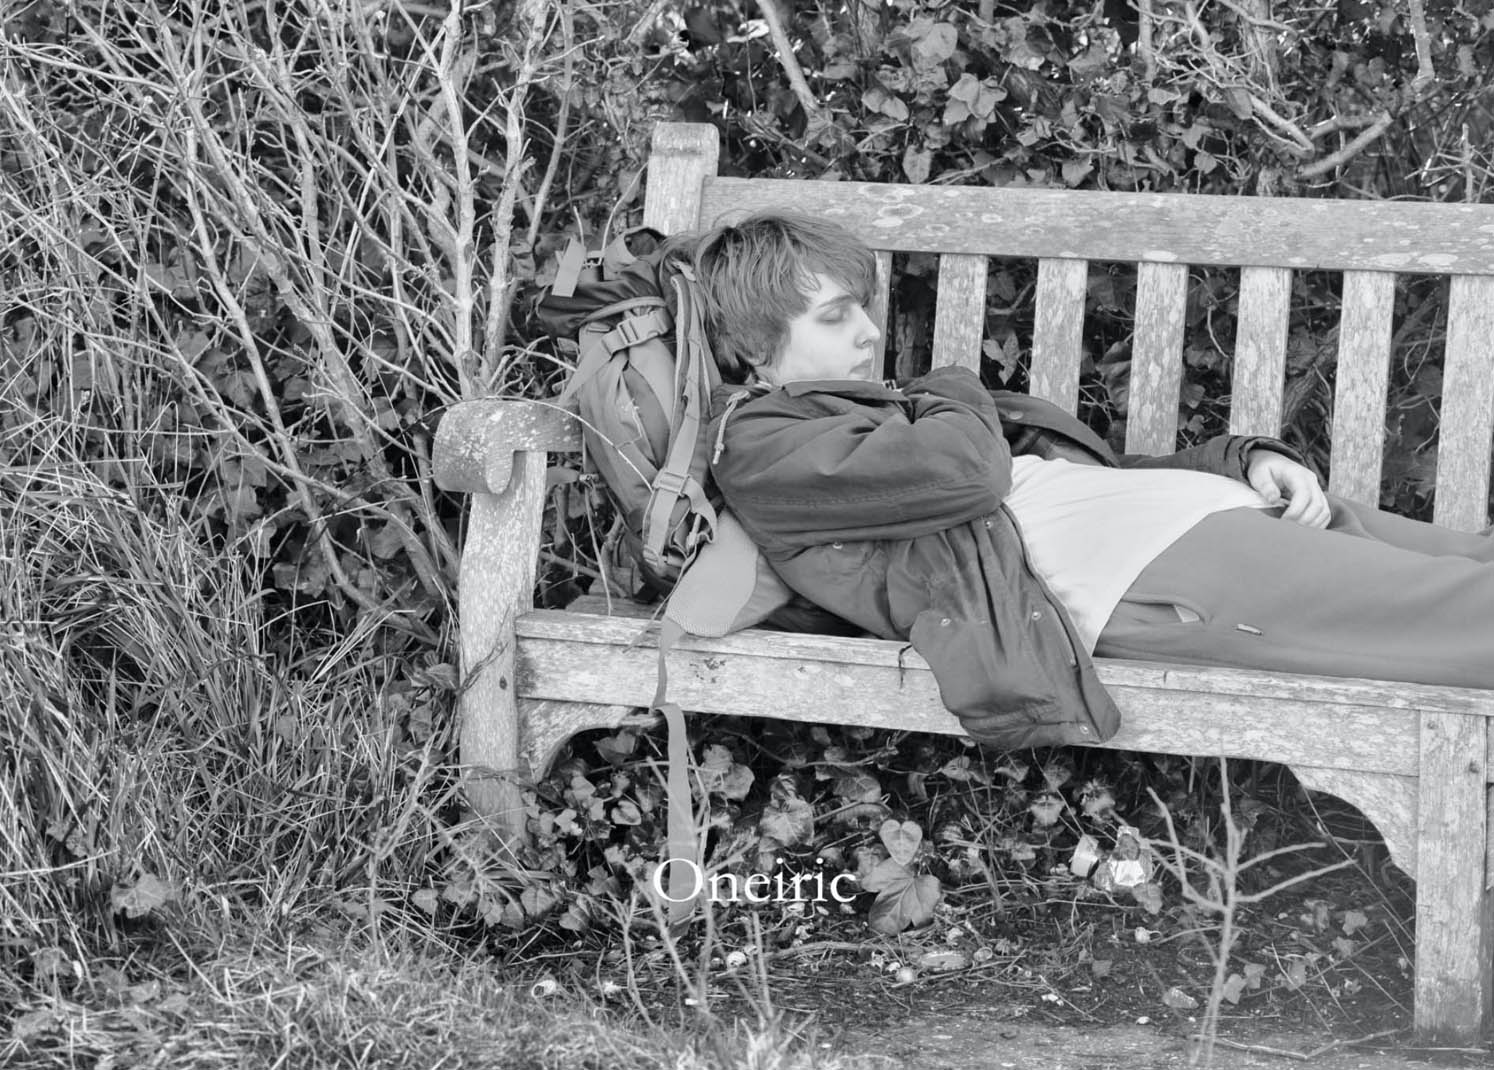 A boy lies on a bench seemingly asleep, to his left is a dense thicket of branches